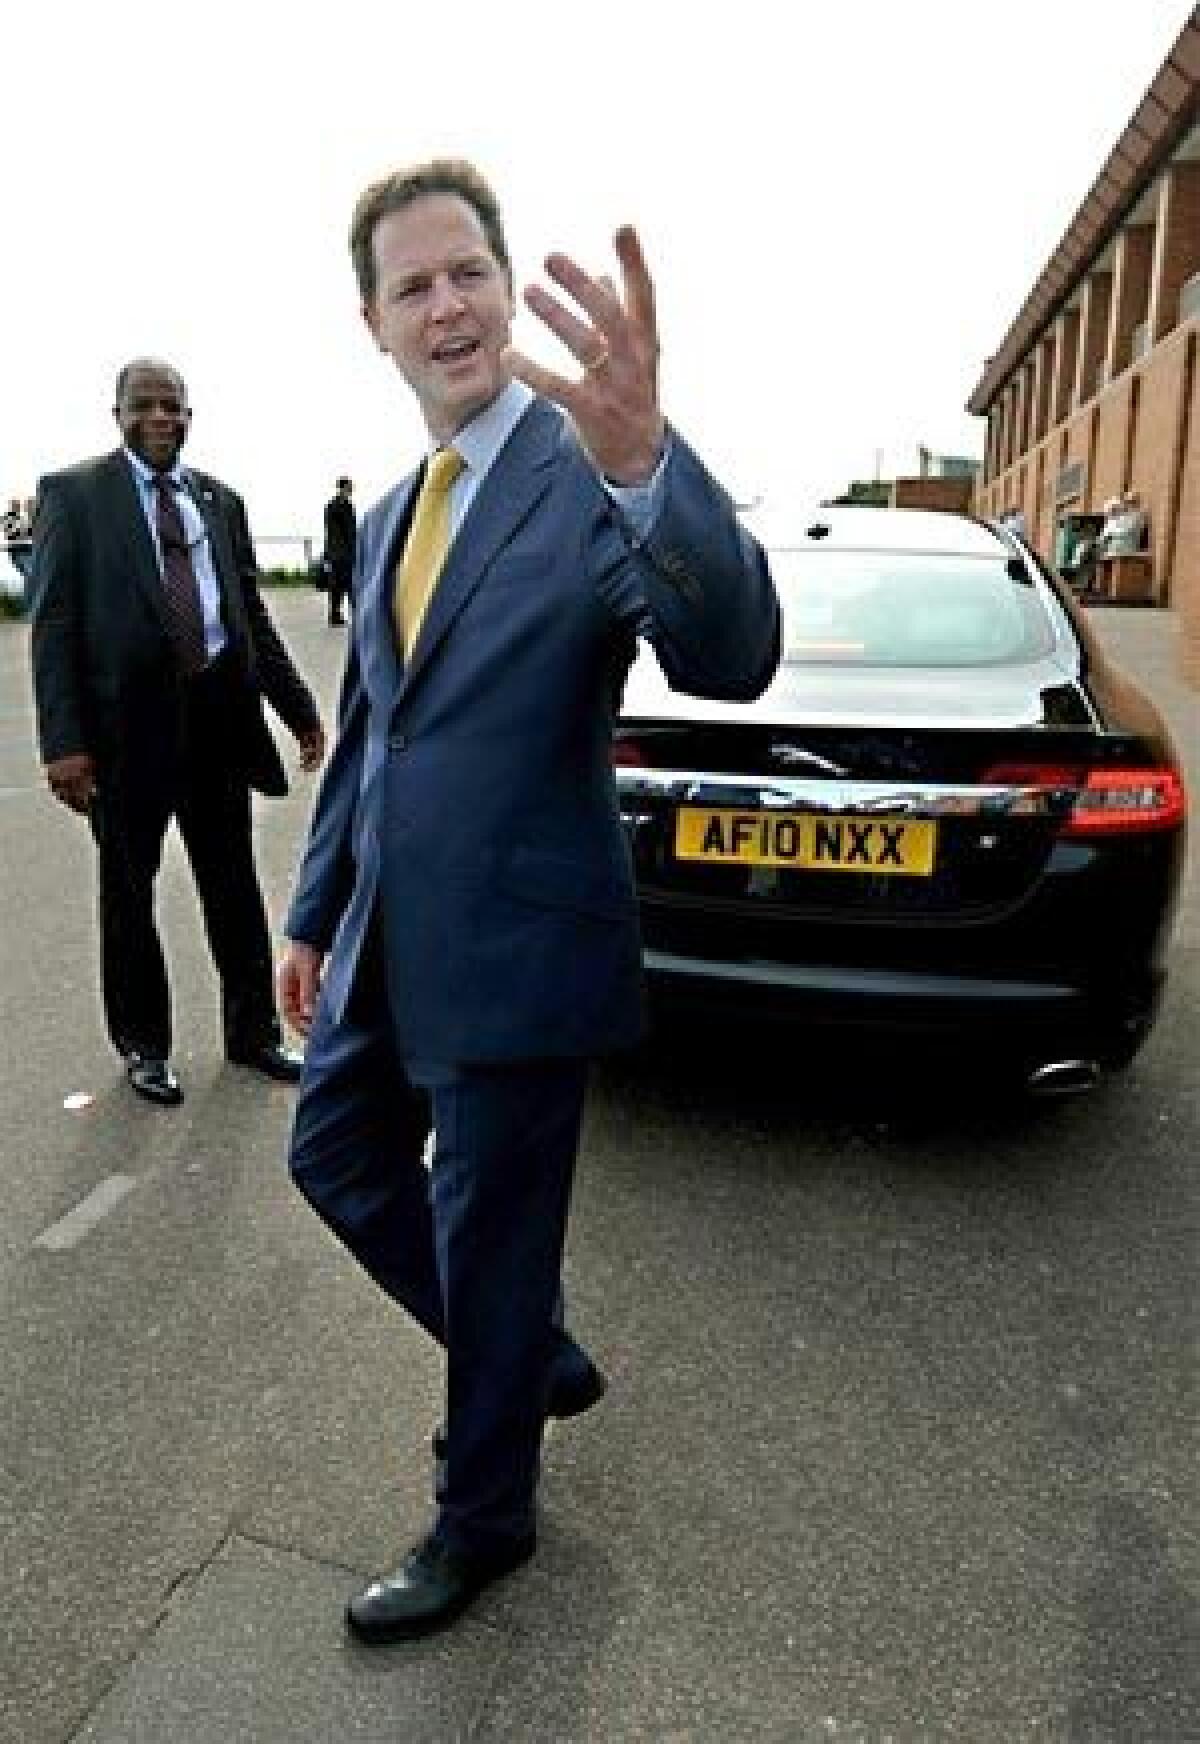 British Deputy Prime Minister Nick Clegg supported the decision to scrap plans for national identification cards.